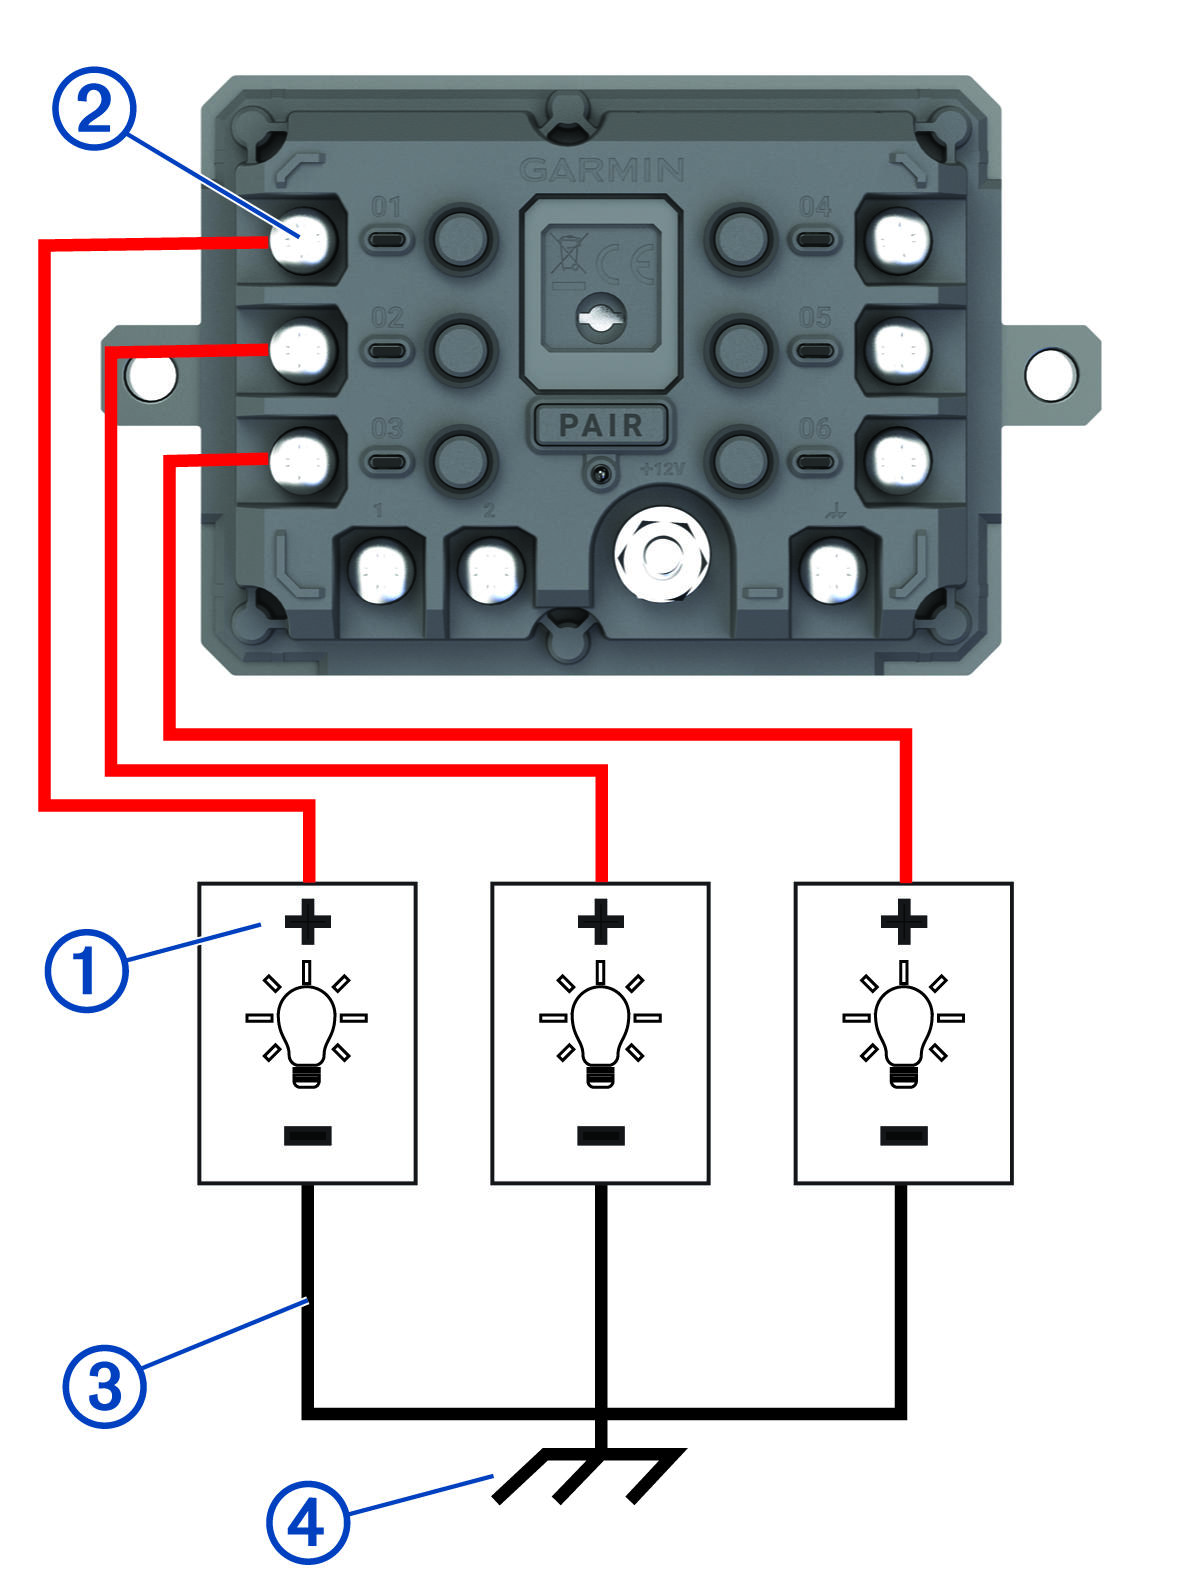 Wiring diagram of accessory connections with callouts